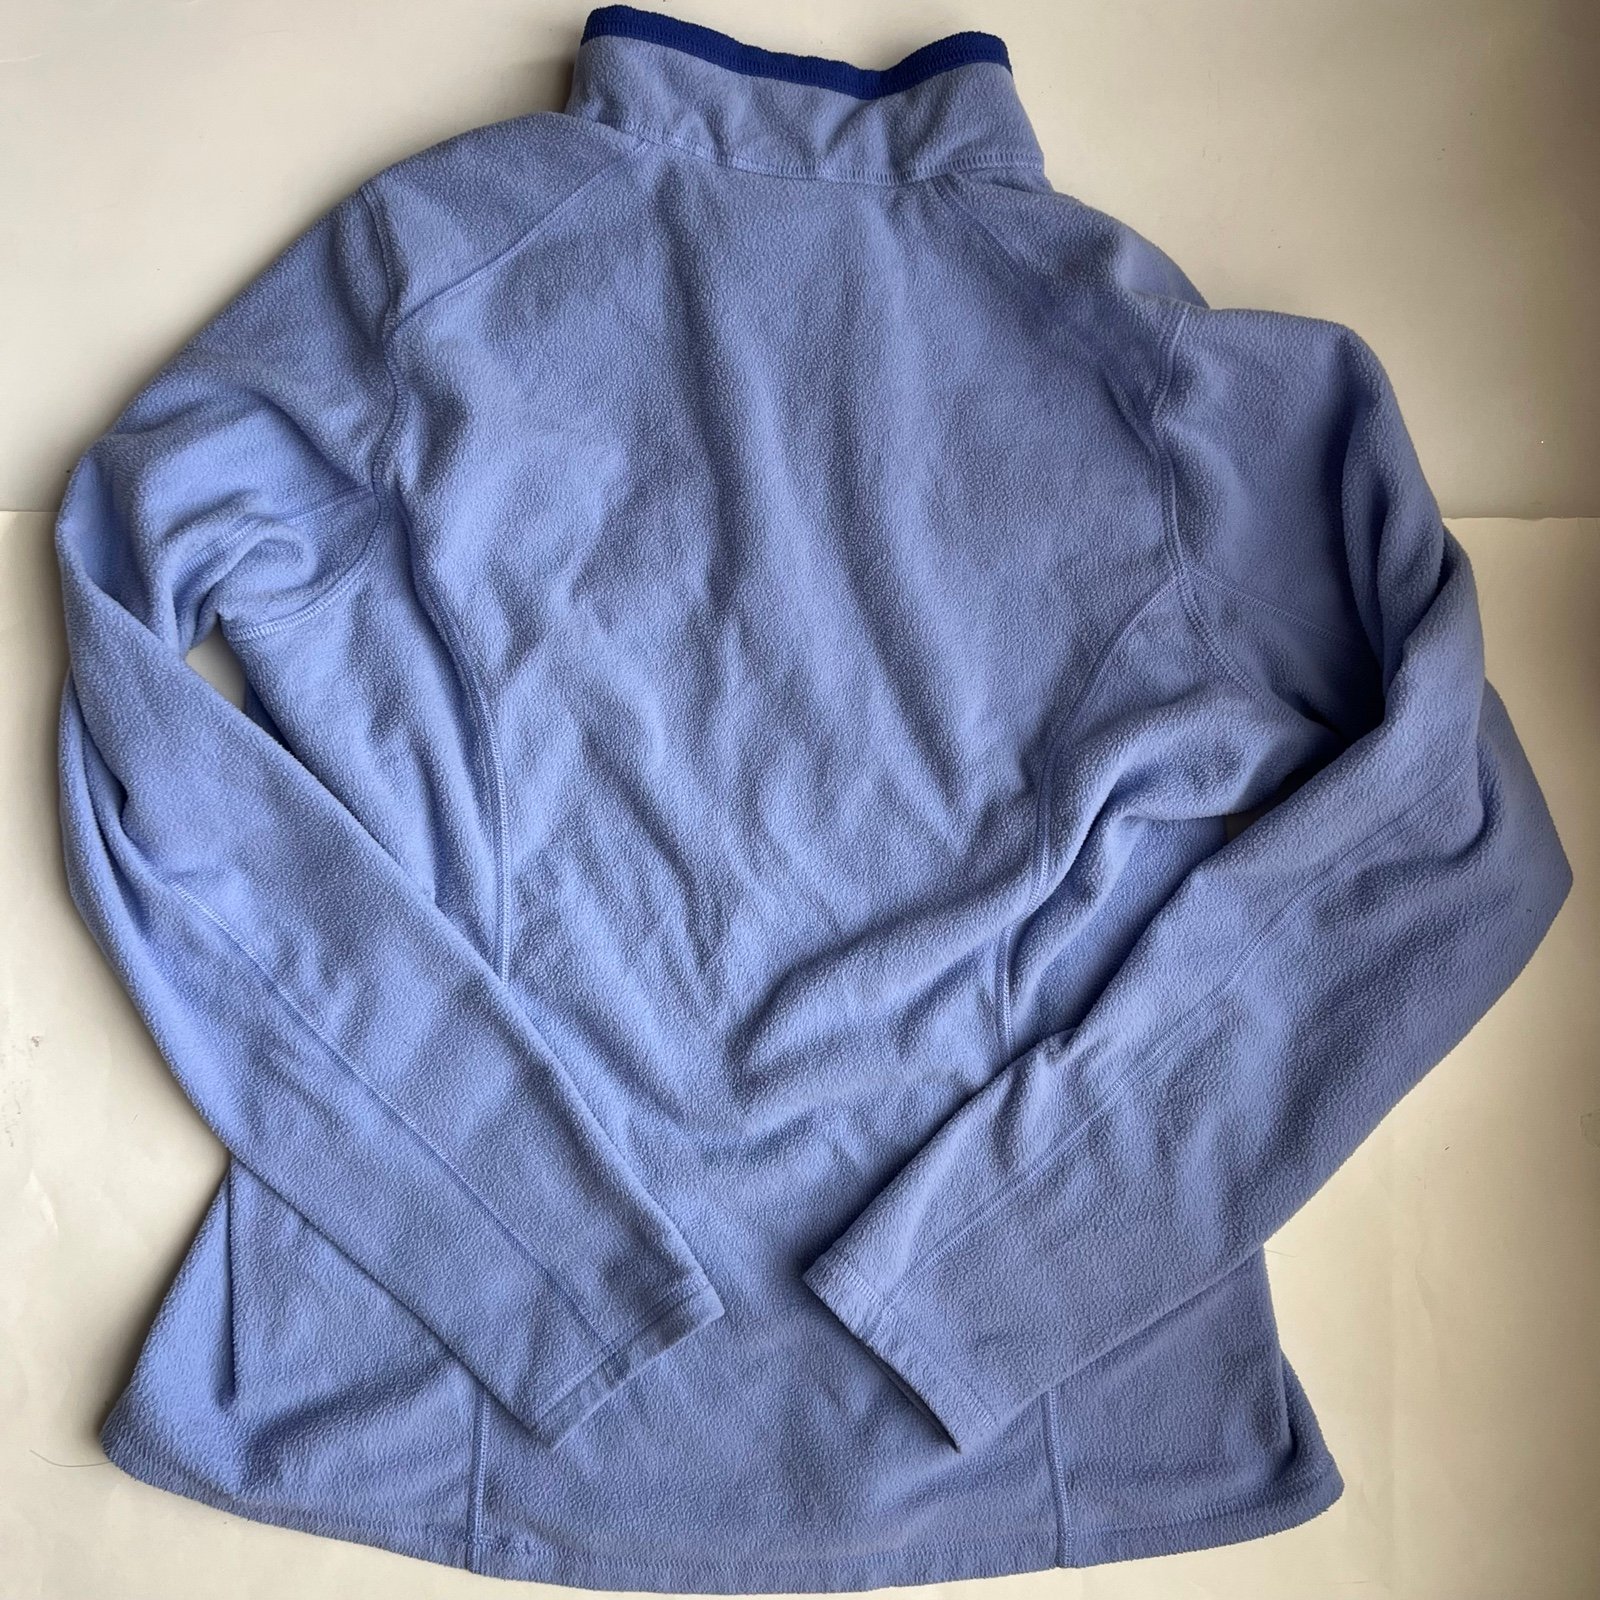 Popular The North Face Women’s Lavender 1/4 Zip Fleece Pullover - Size Large (Used) FJnhhMSe6 Online Shop